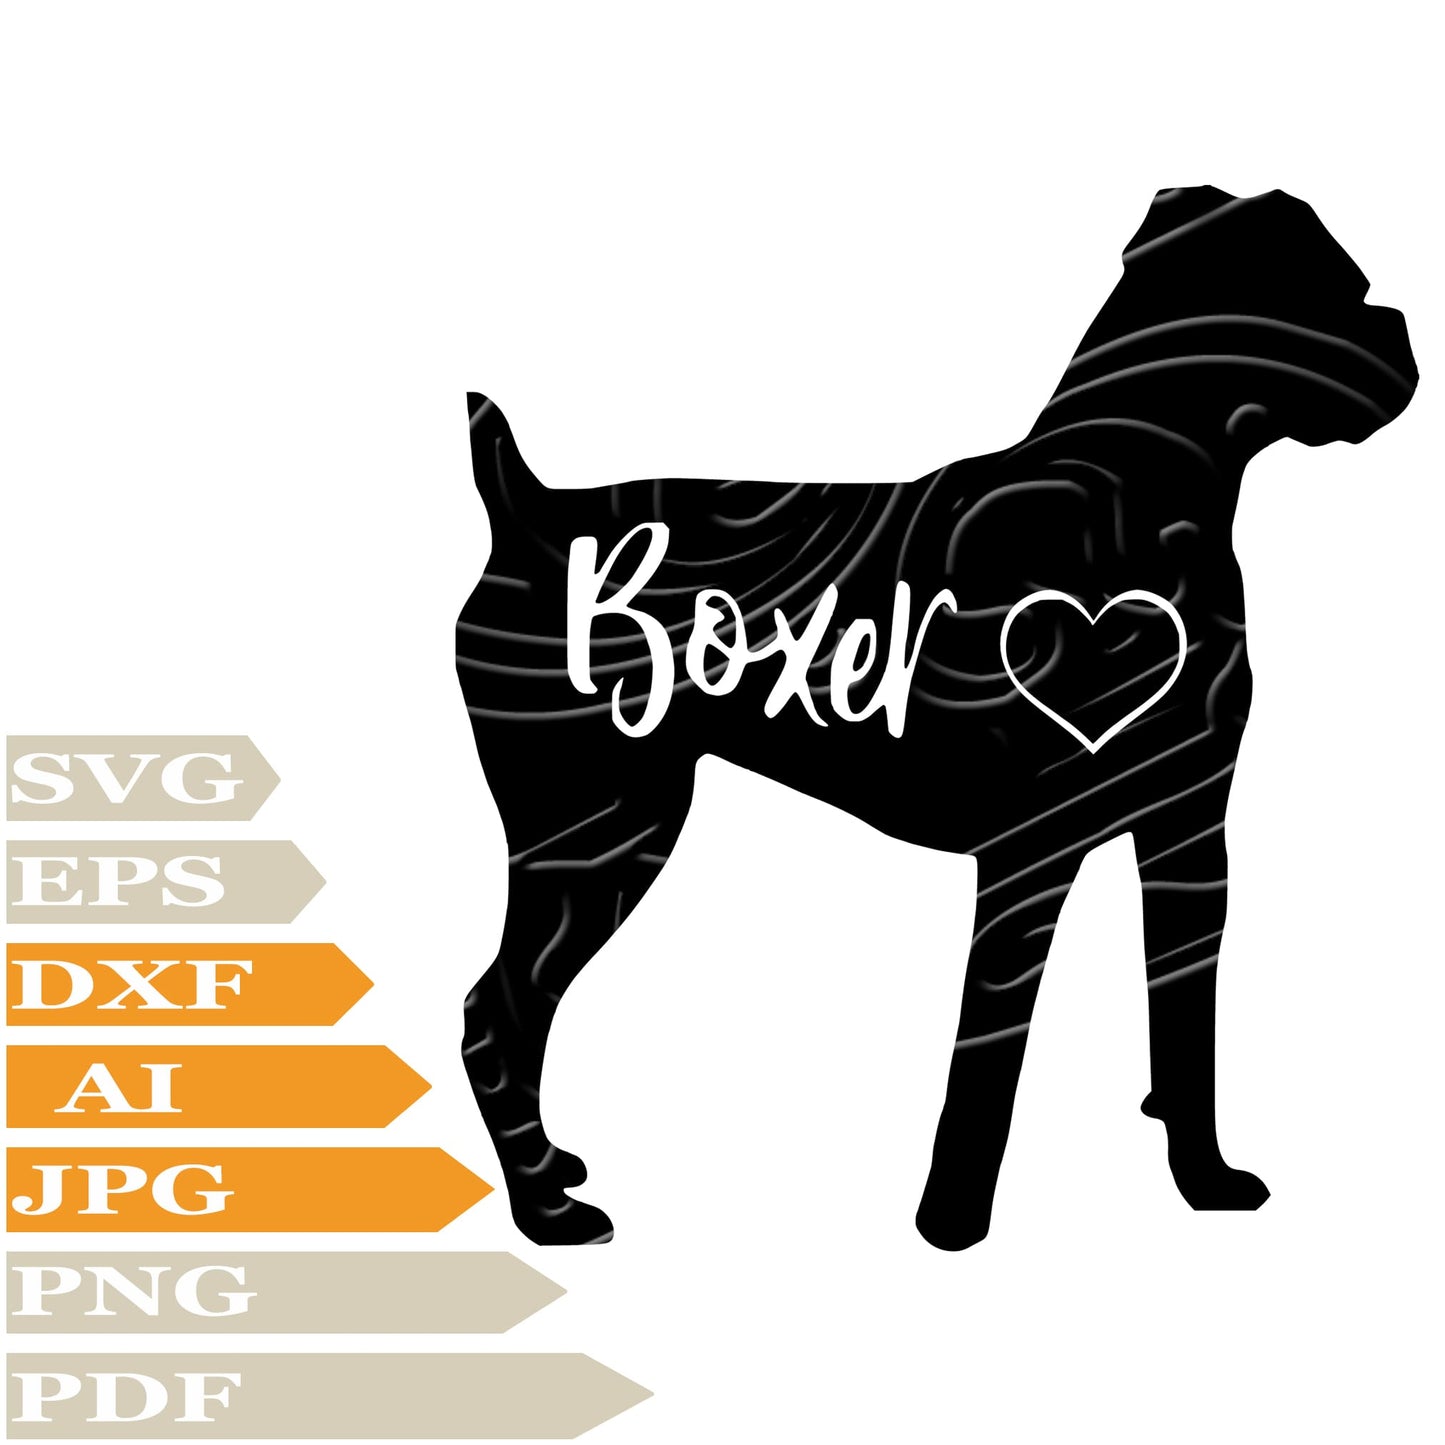 Boxer, Boxer Love Svg File, Image Cut, Png, For Tattoo, Silhouette, Digital Vector Download, Cut File, Clipart, For Cricut